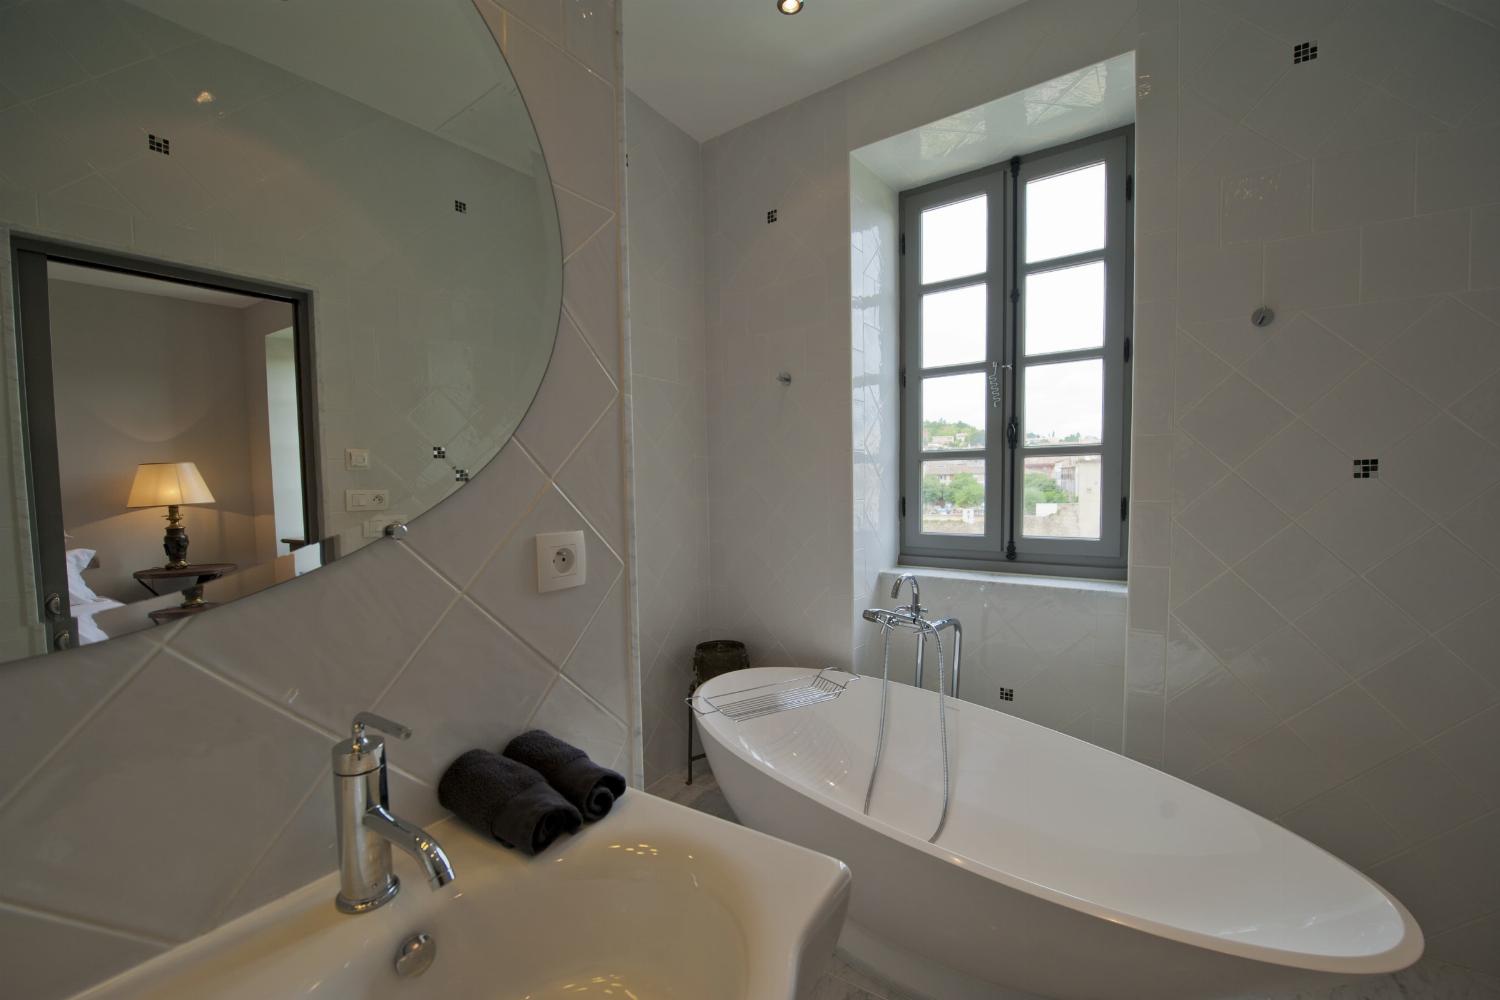 Bathroom | Rental home in South of France